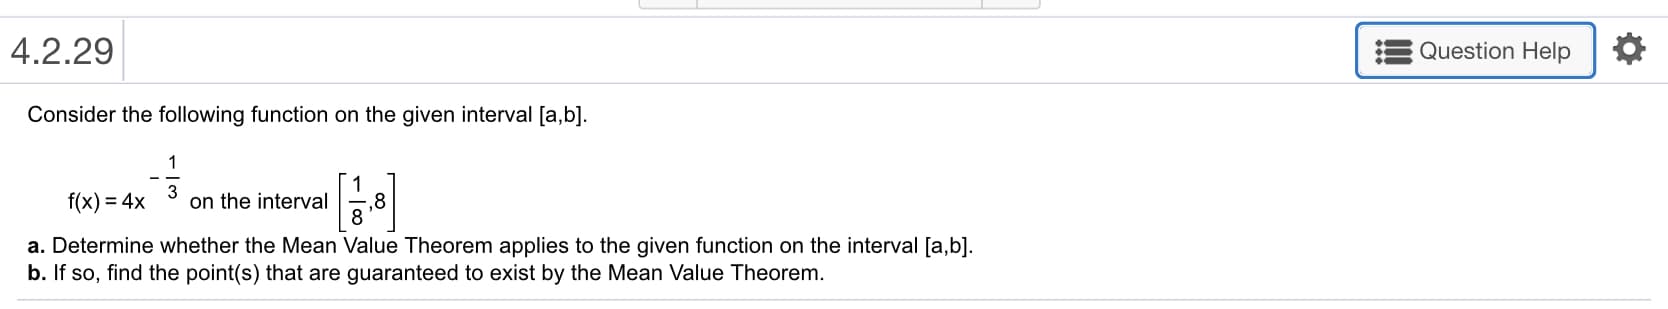 4.2.29
Question Help
Consider the following function on the given interval [a,b]
f(x)-4x on the interval ,8
a. Determine whether the Mean Value Theorem applies to the given function on the interval [a,b]
b. If so, find the point(s) that are guaranteed to exist by the Mean Value Theorem
